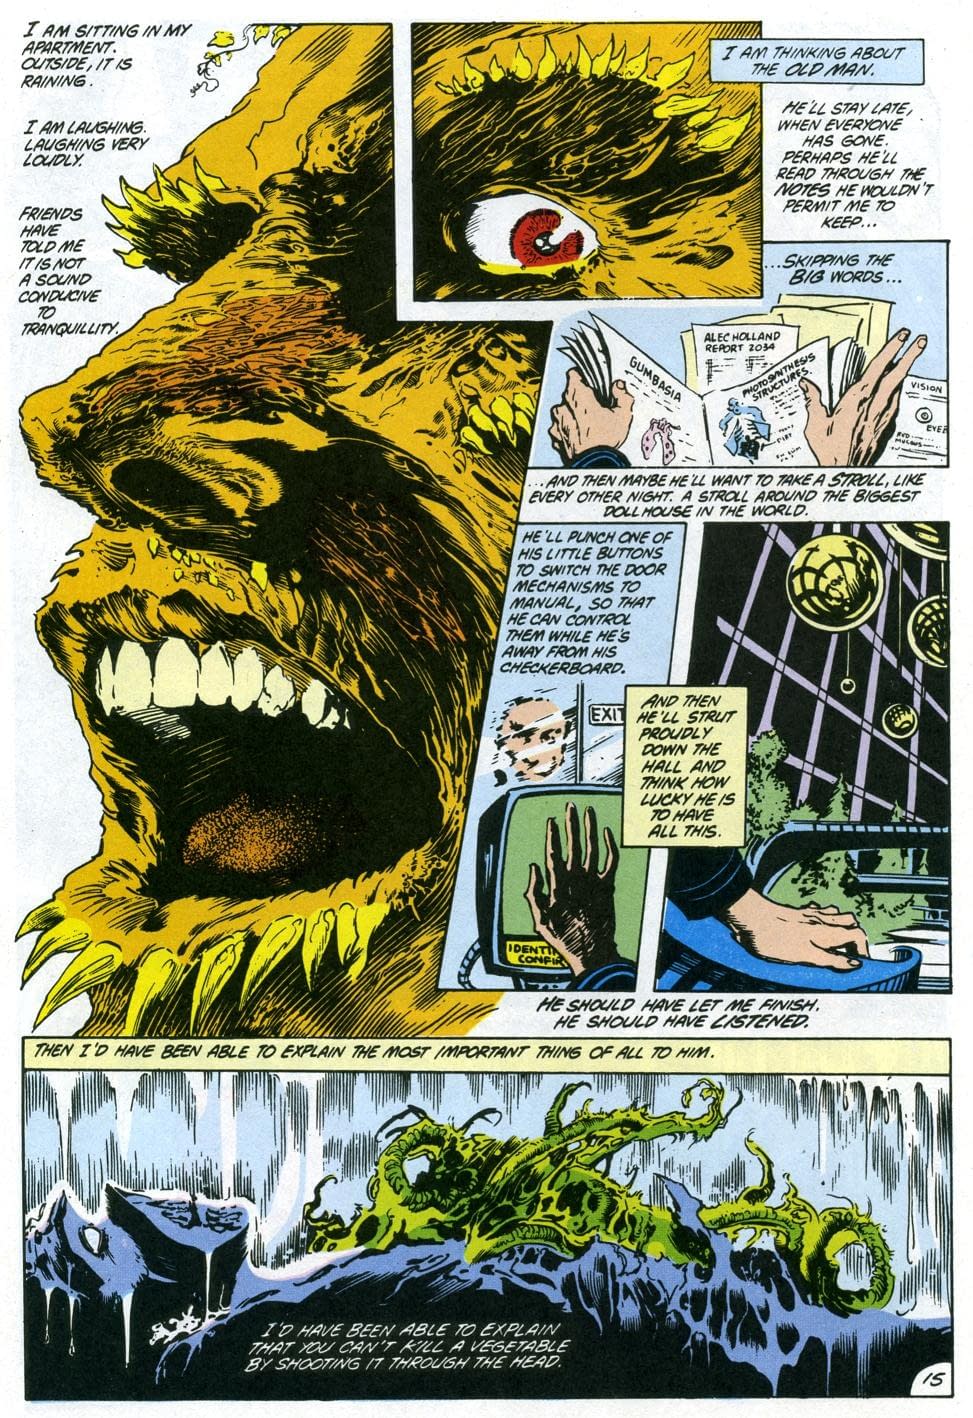 "Swamp Thing" Learns Nothing from Alan Moore's "Anatomy Lesson" [OPINION]